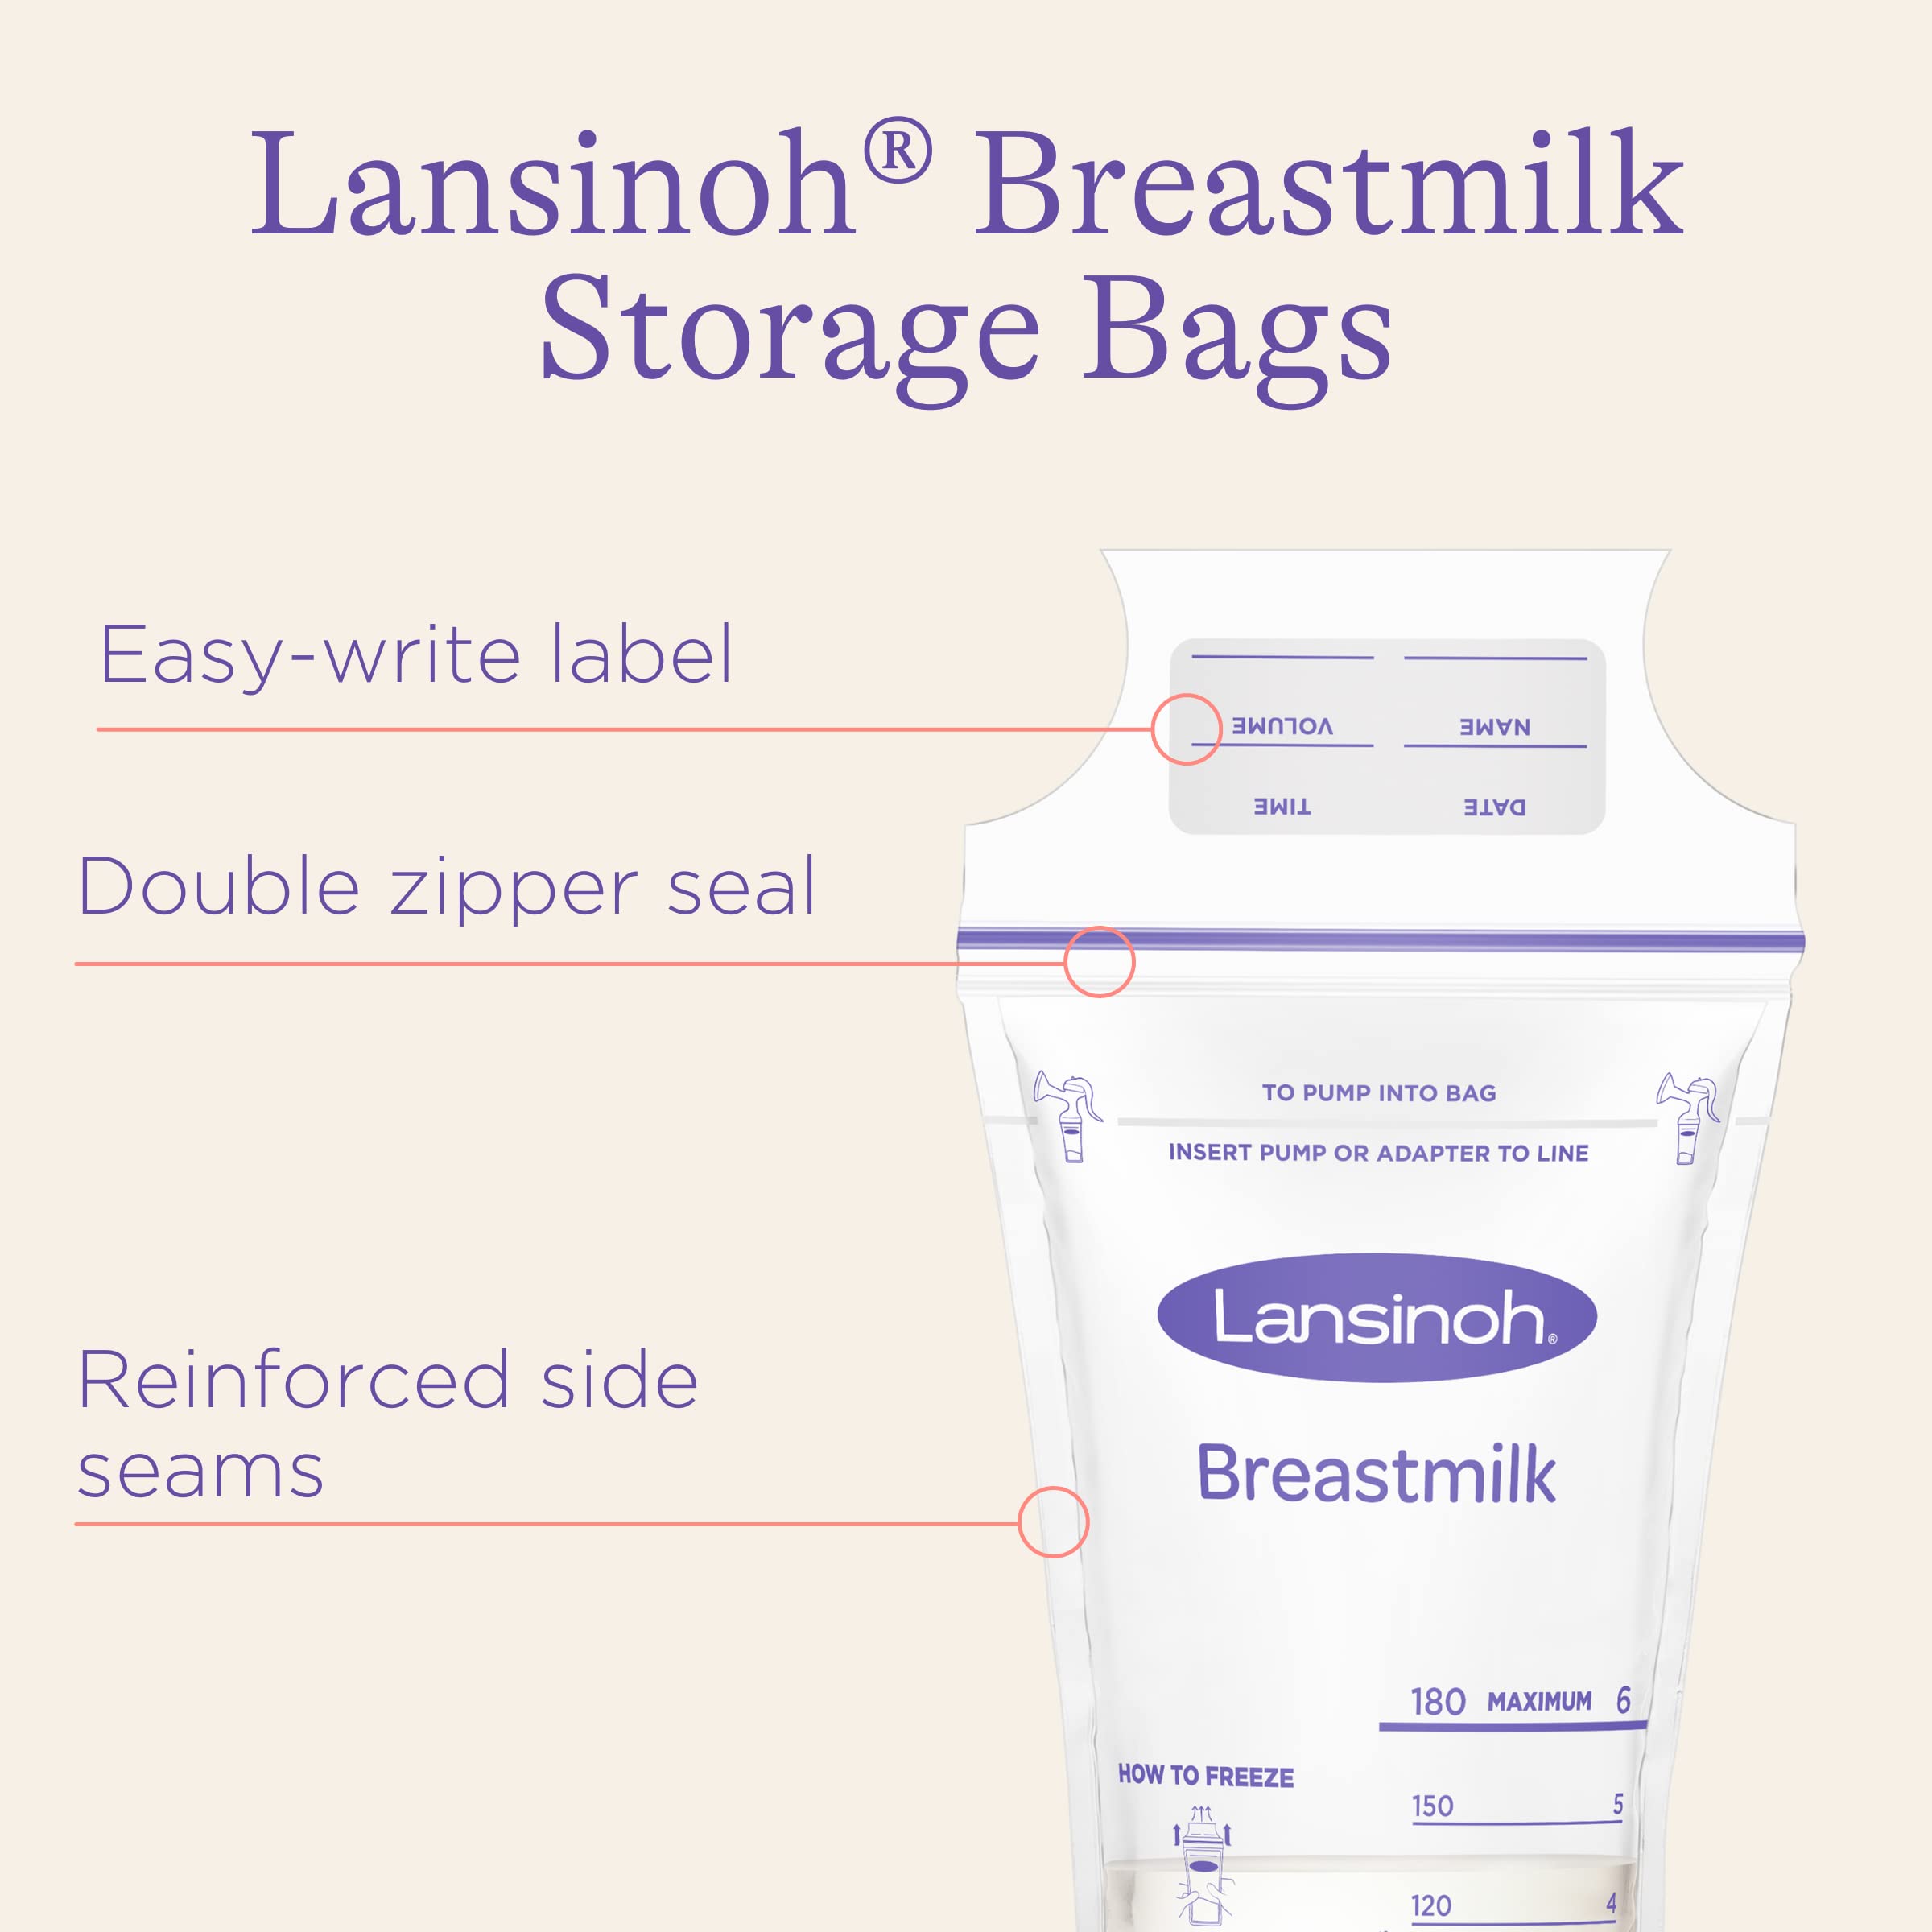 Lansinoh Breastmilk Storage Bags, 75 Count, 3 Packs of 25 Milk Bags, 6 Ounce, Easy to Use Milk Storage Bags for Breastfeeding, Presterilized, Hygienically Doubled-Sealed for Refrigeration and Freezing